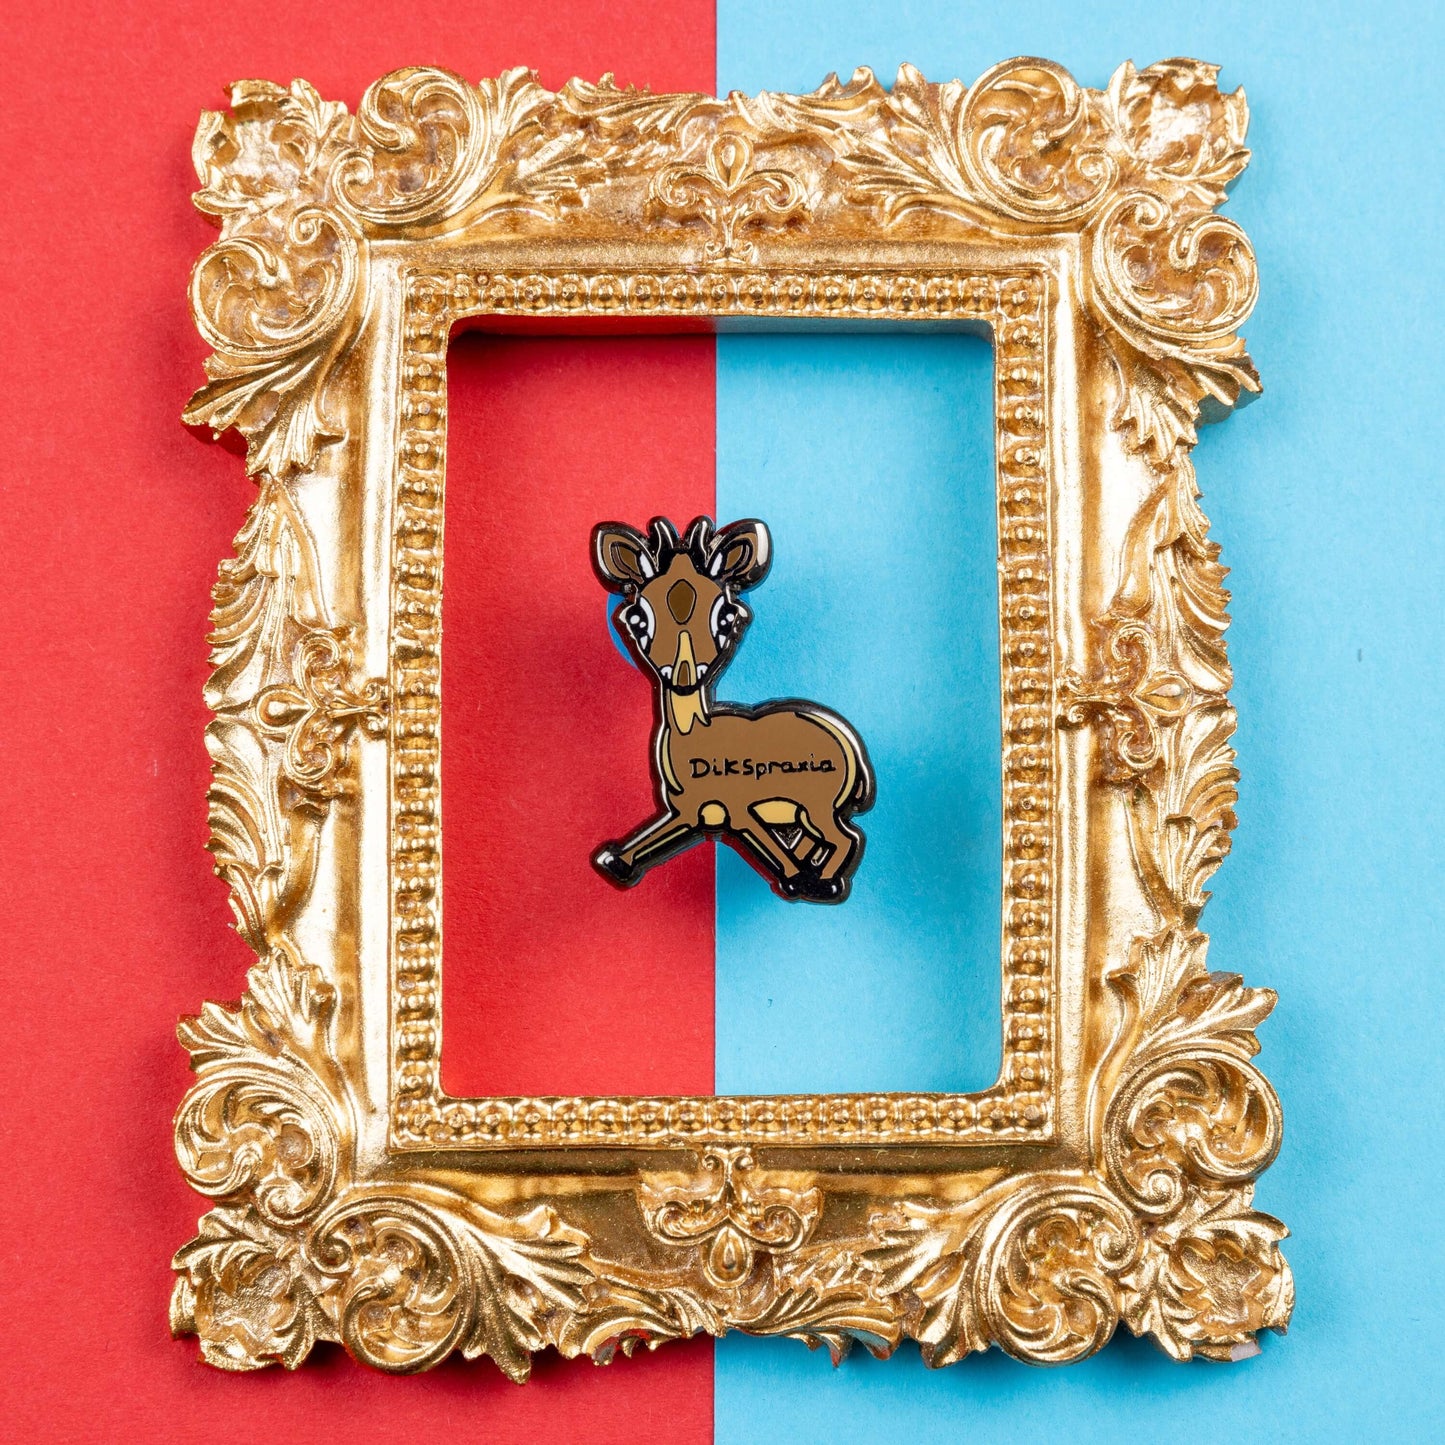 The Dikspraxia Enamel Pin - Dyspraxia on red and blue card in a gold ornate frame. The brown dik dik antelope shaped enamel pin has its two front legs splayed chaotically with black text reading 'dikspraxia' across its middle. The design is raising awareness for dyspraxia and neurodivergence.